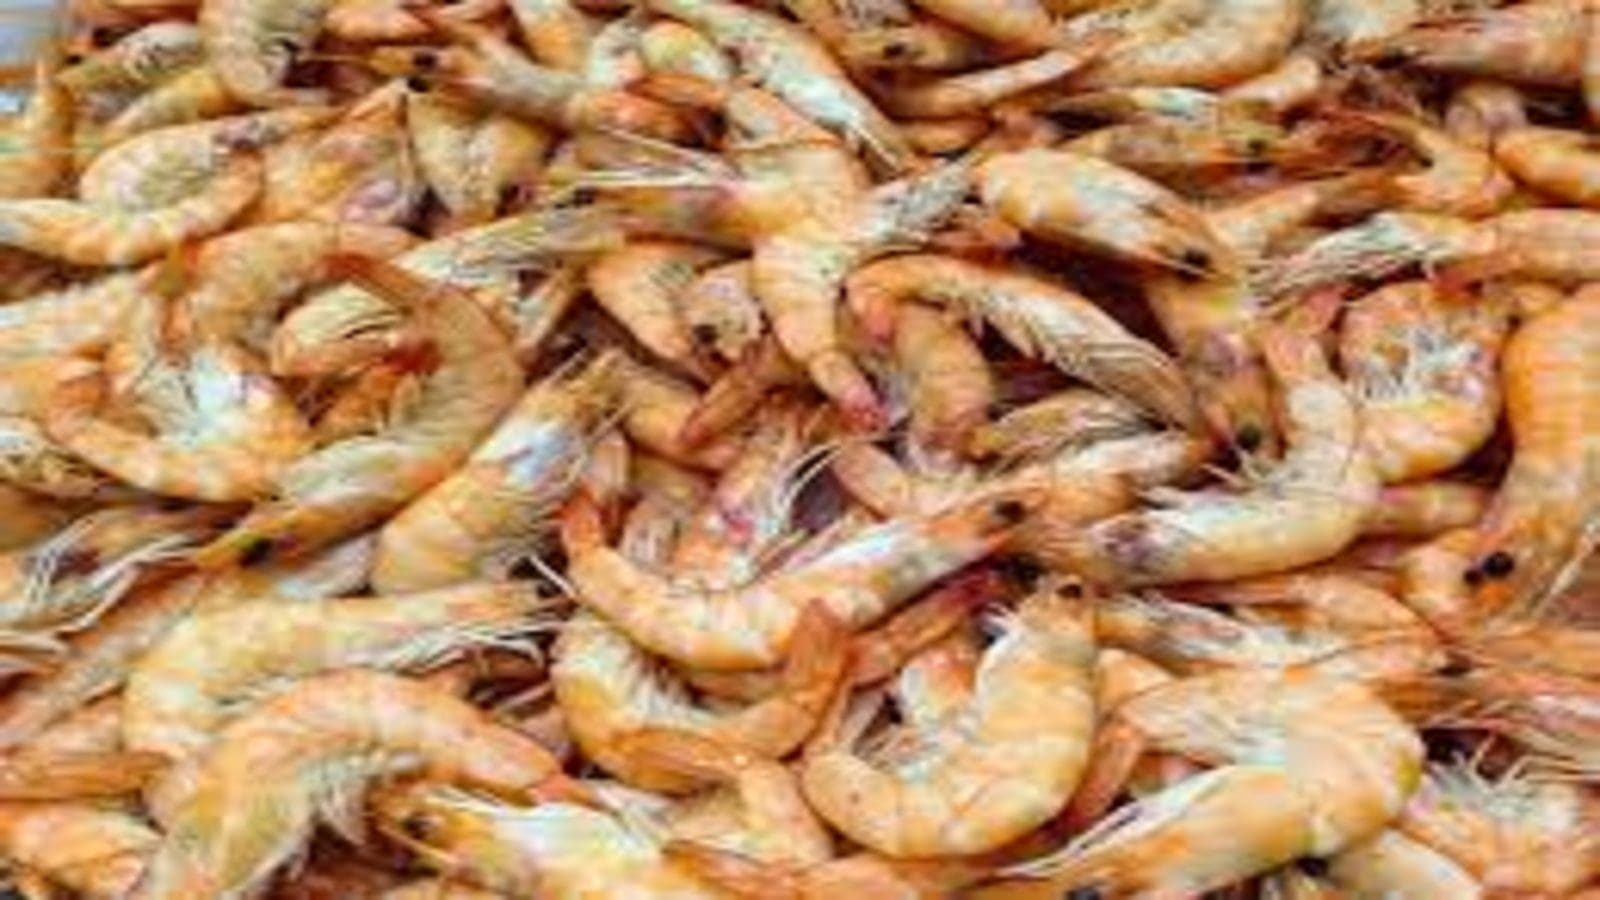 Leading aquaculture industry players team up on new shrimp feed